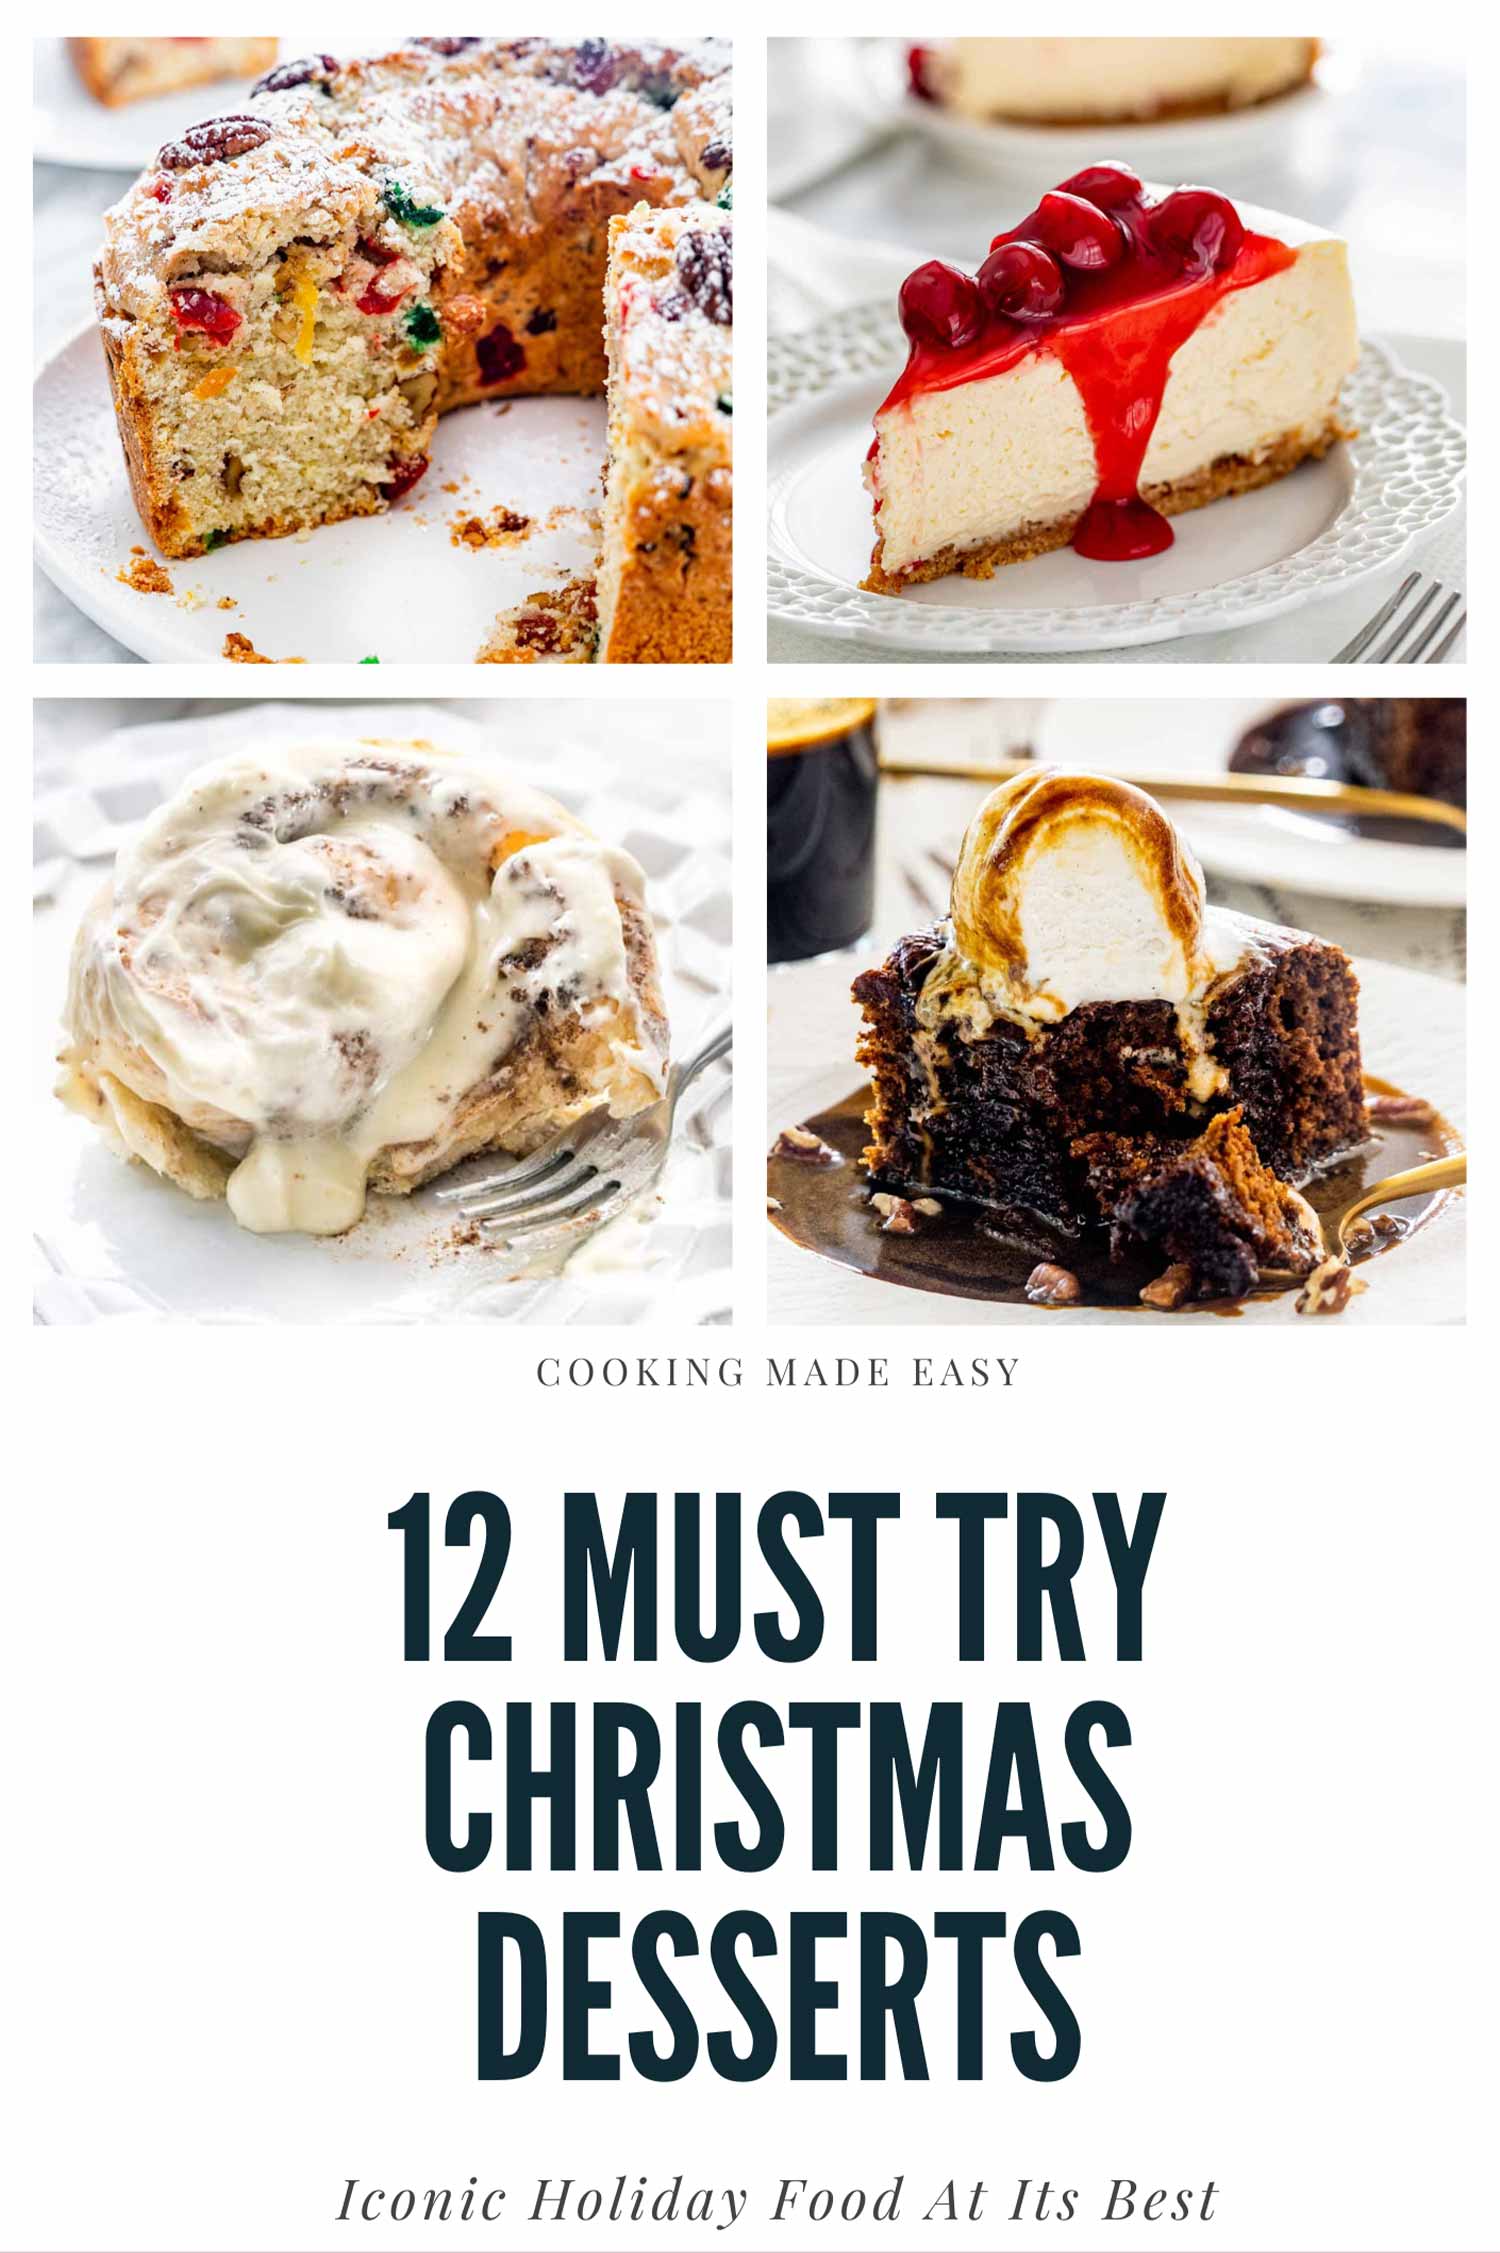 50 Traditional Christmas Desserts We'll Never Stop Making